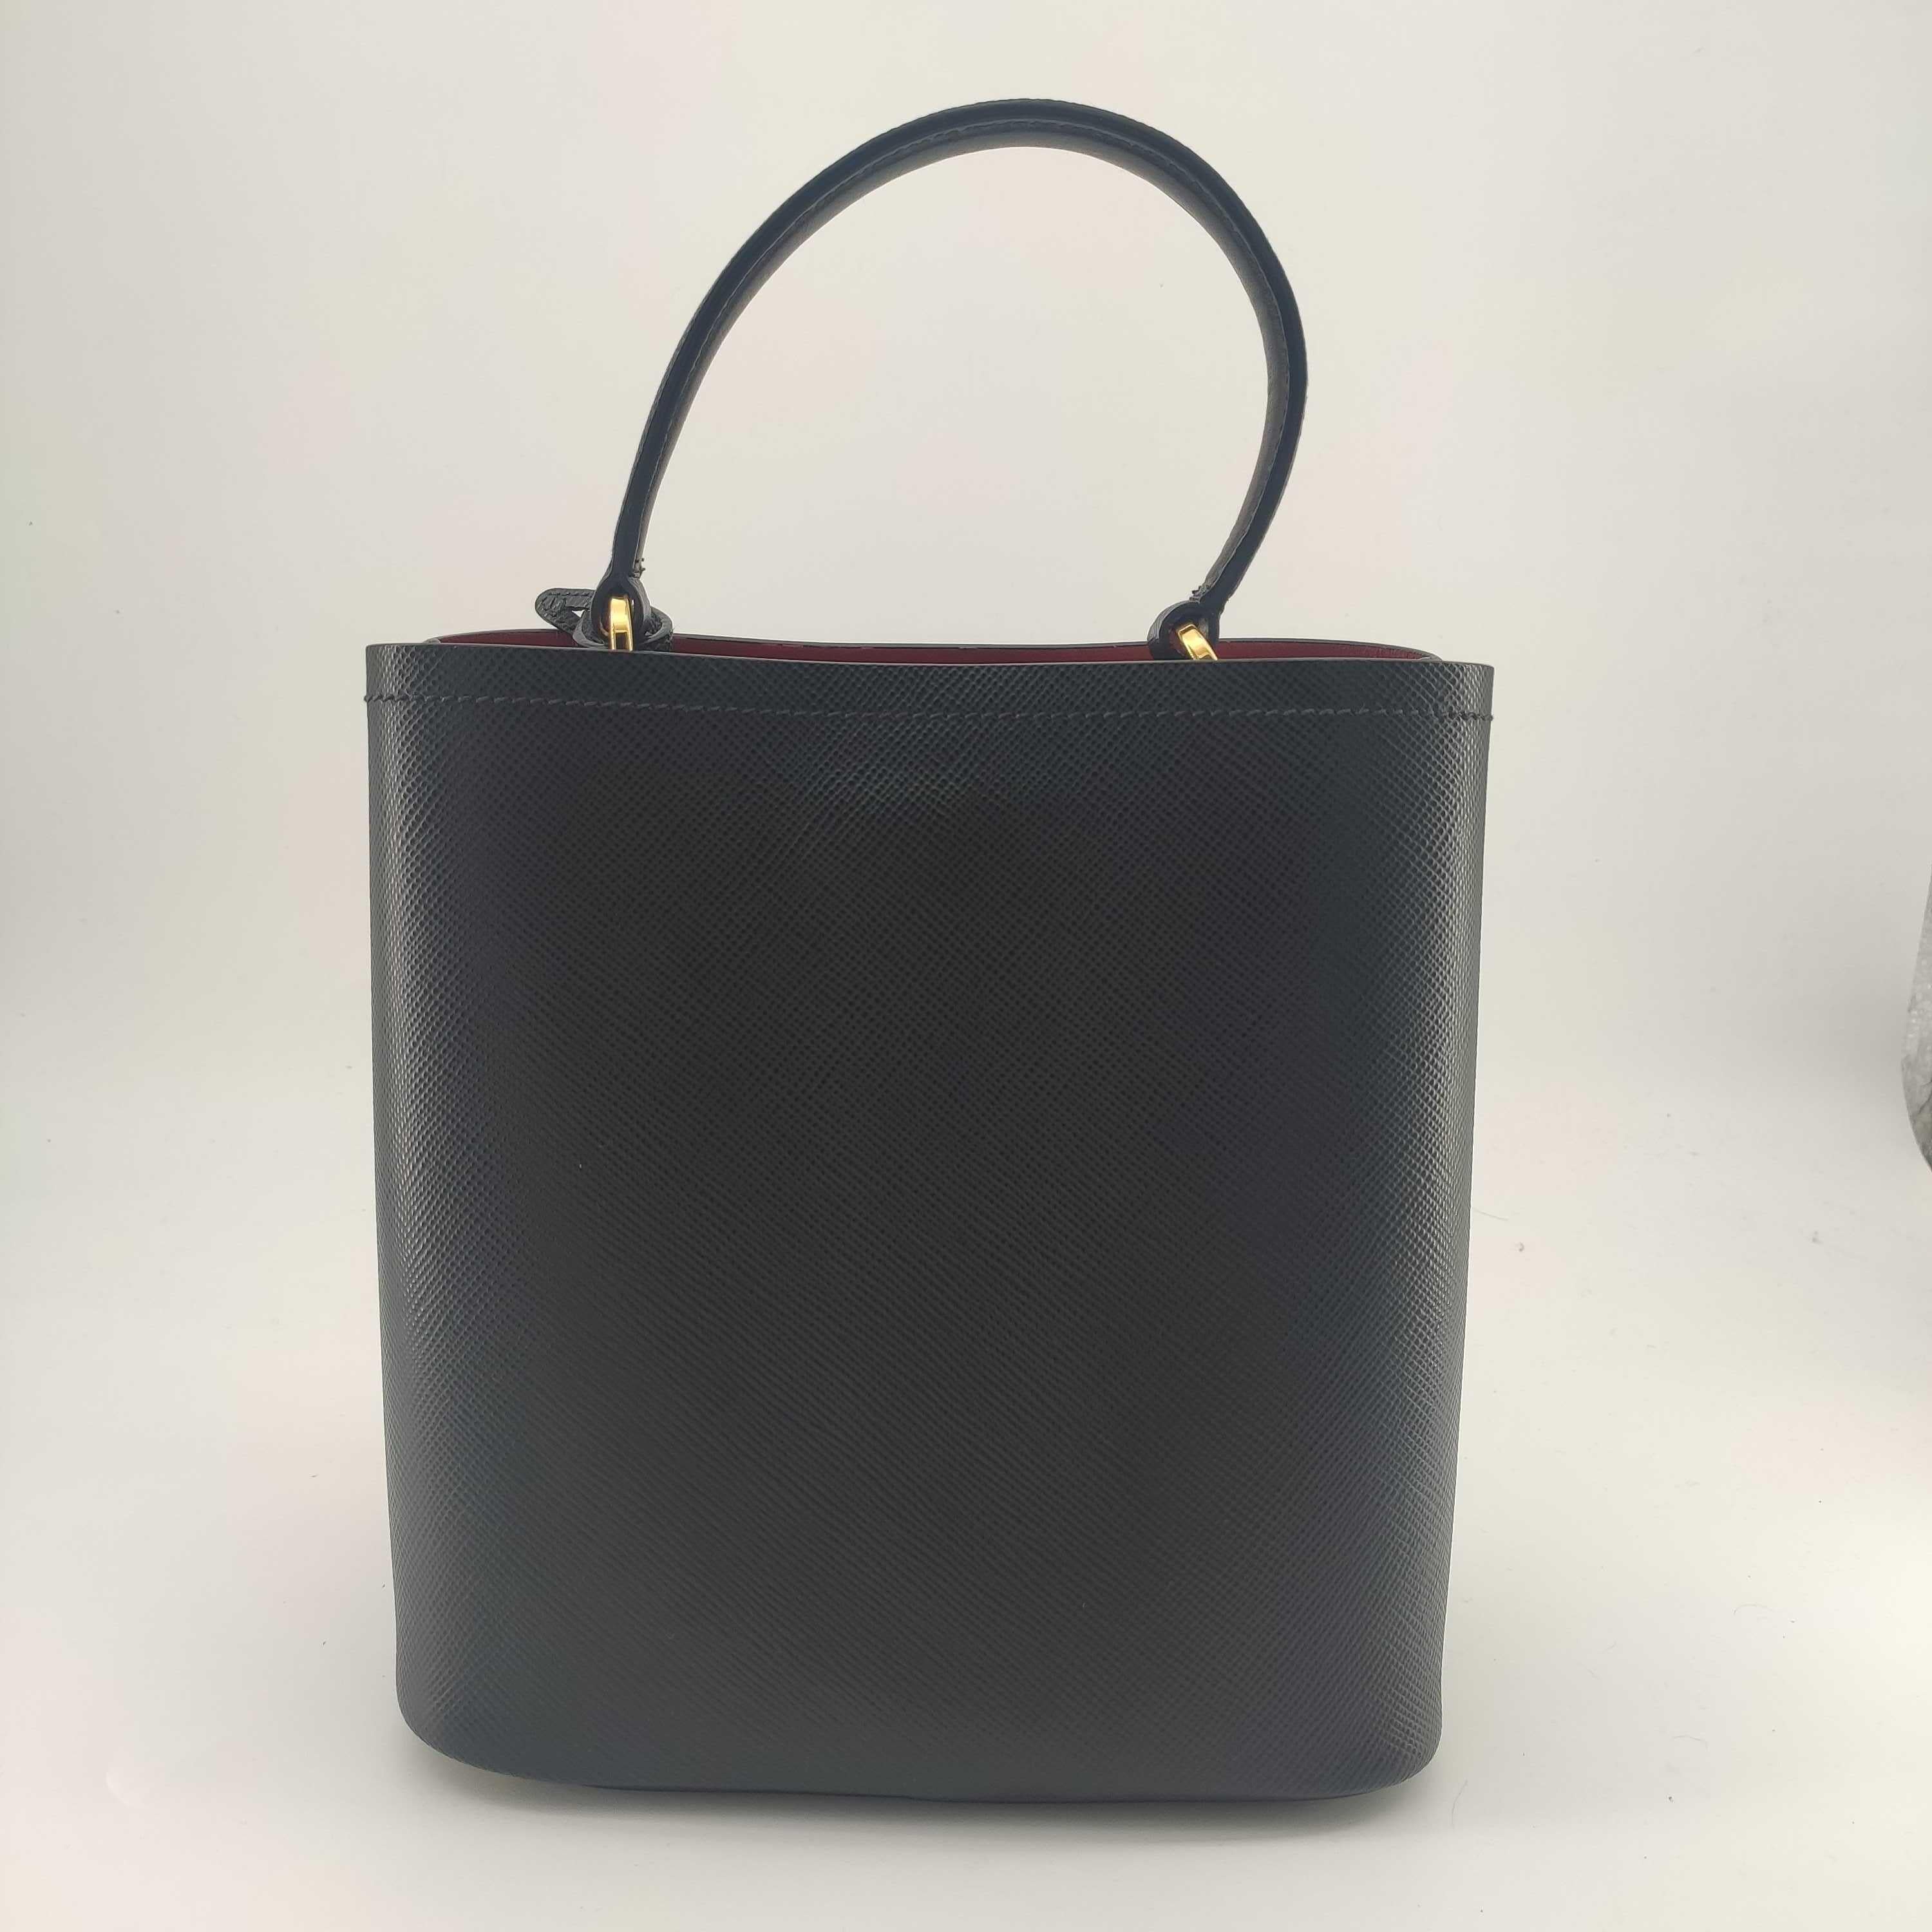 PRADA Panier Shoulder bag in Black Leather In Excellent Condition For Sale In Clichy, FR